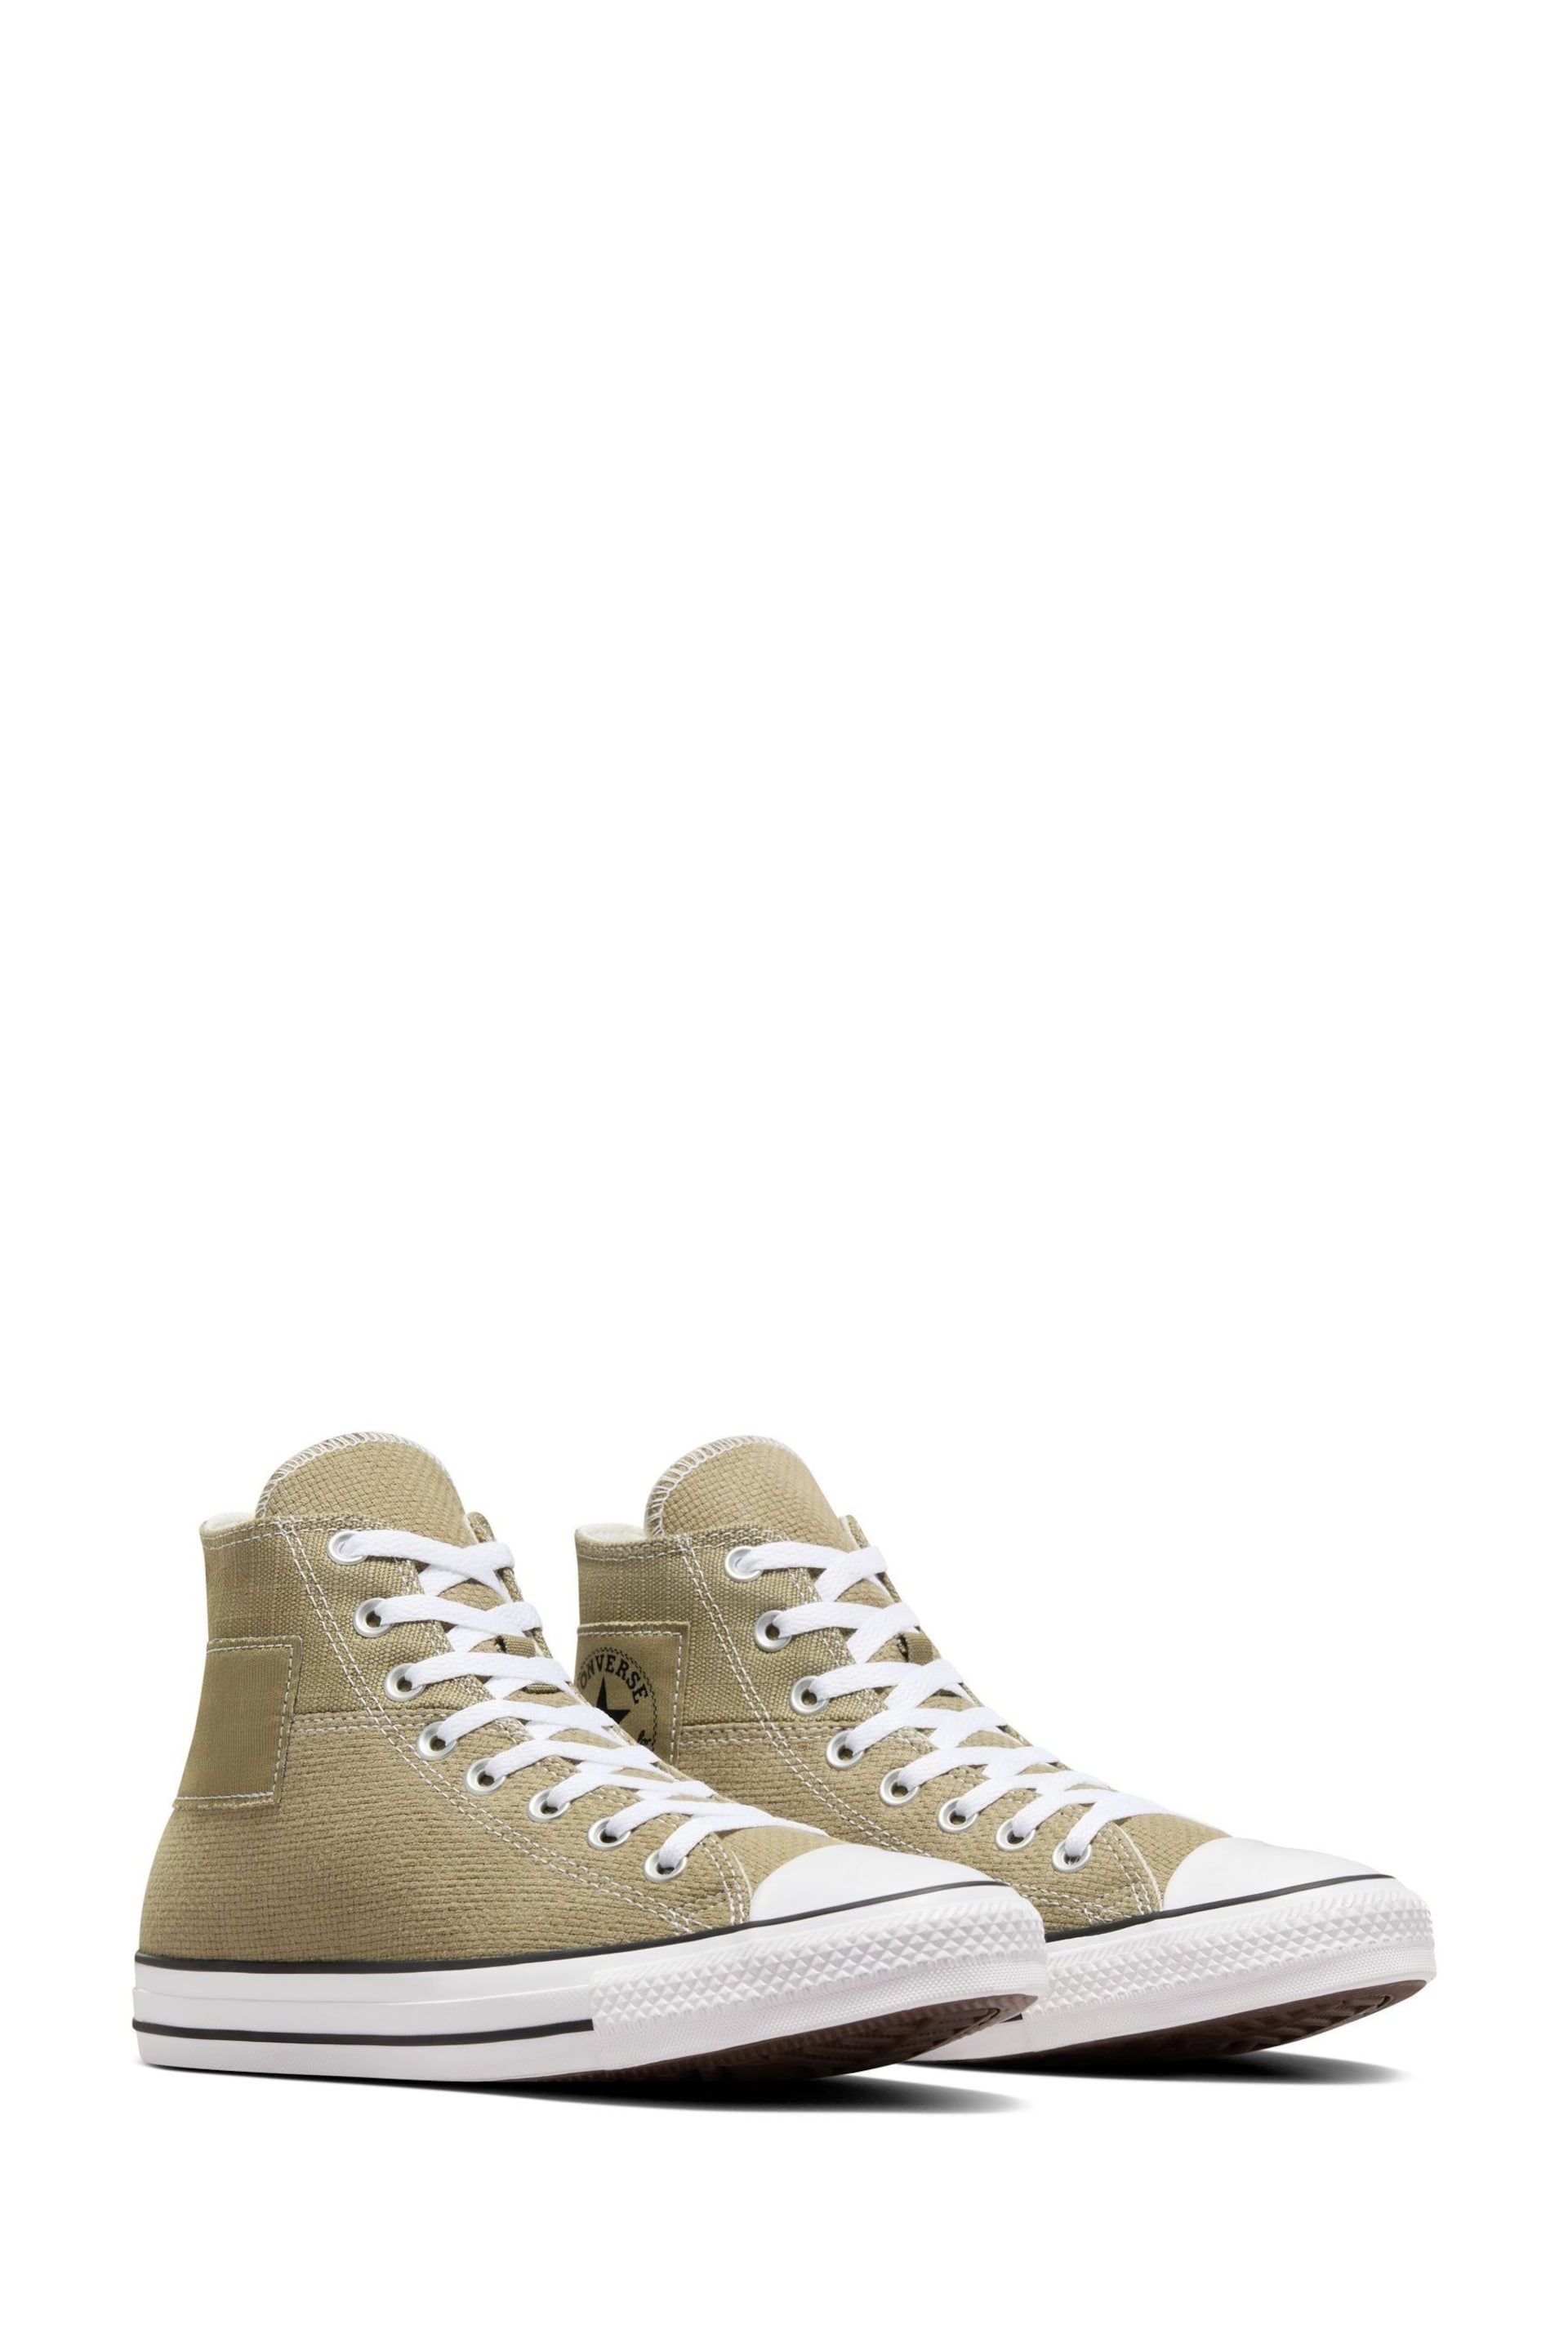 Converse Brown Chuck Taylor All Star High Trainers - Image 5 of 8